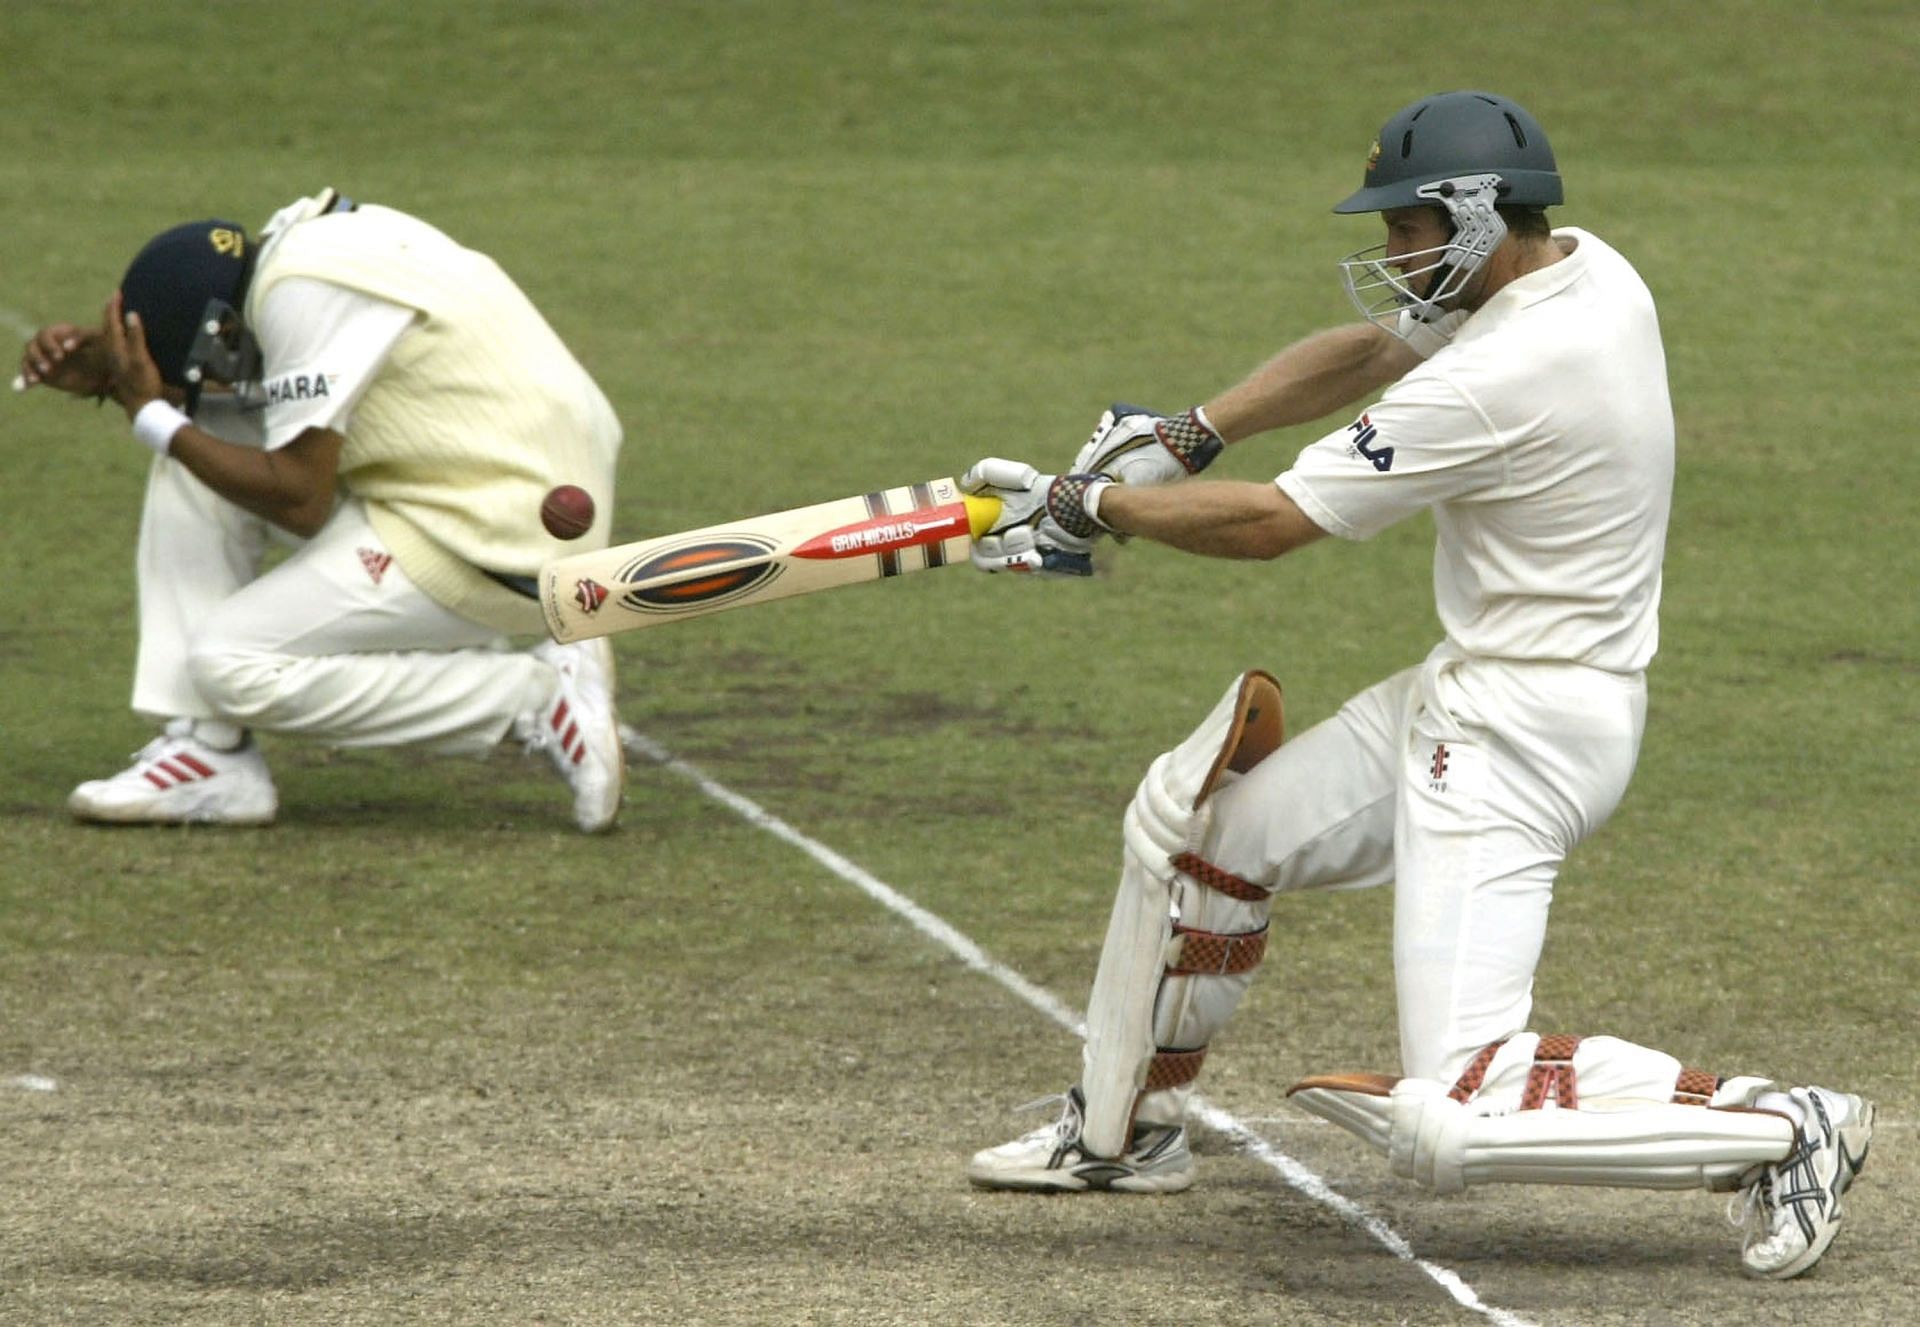 Katich was the best batter on display